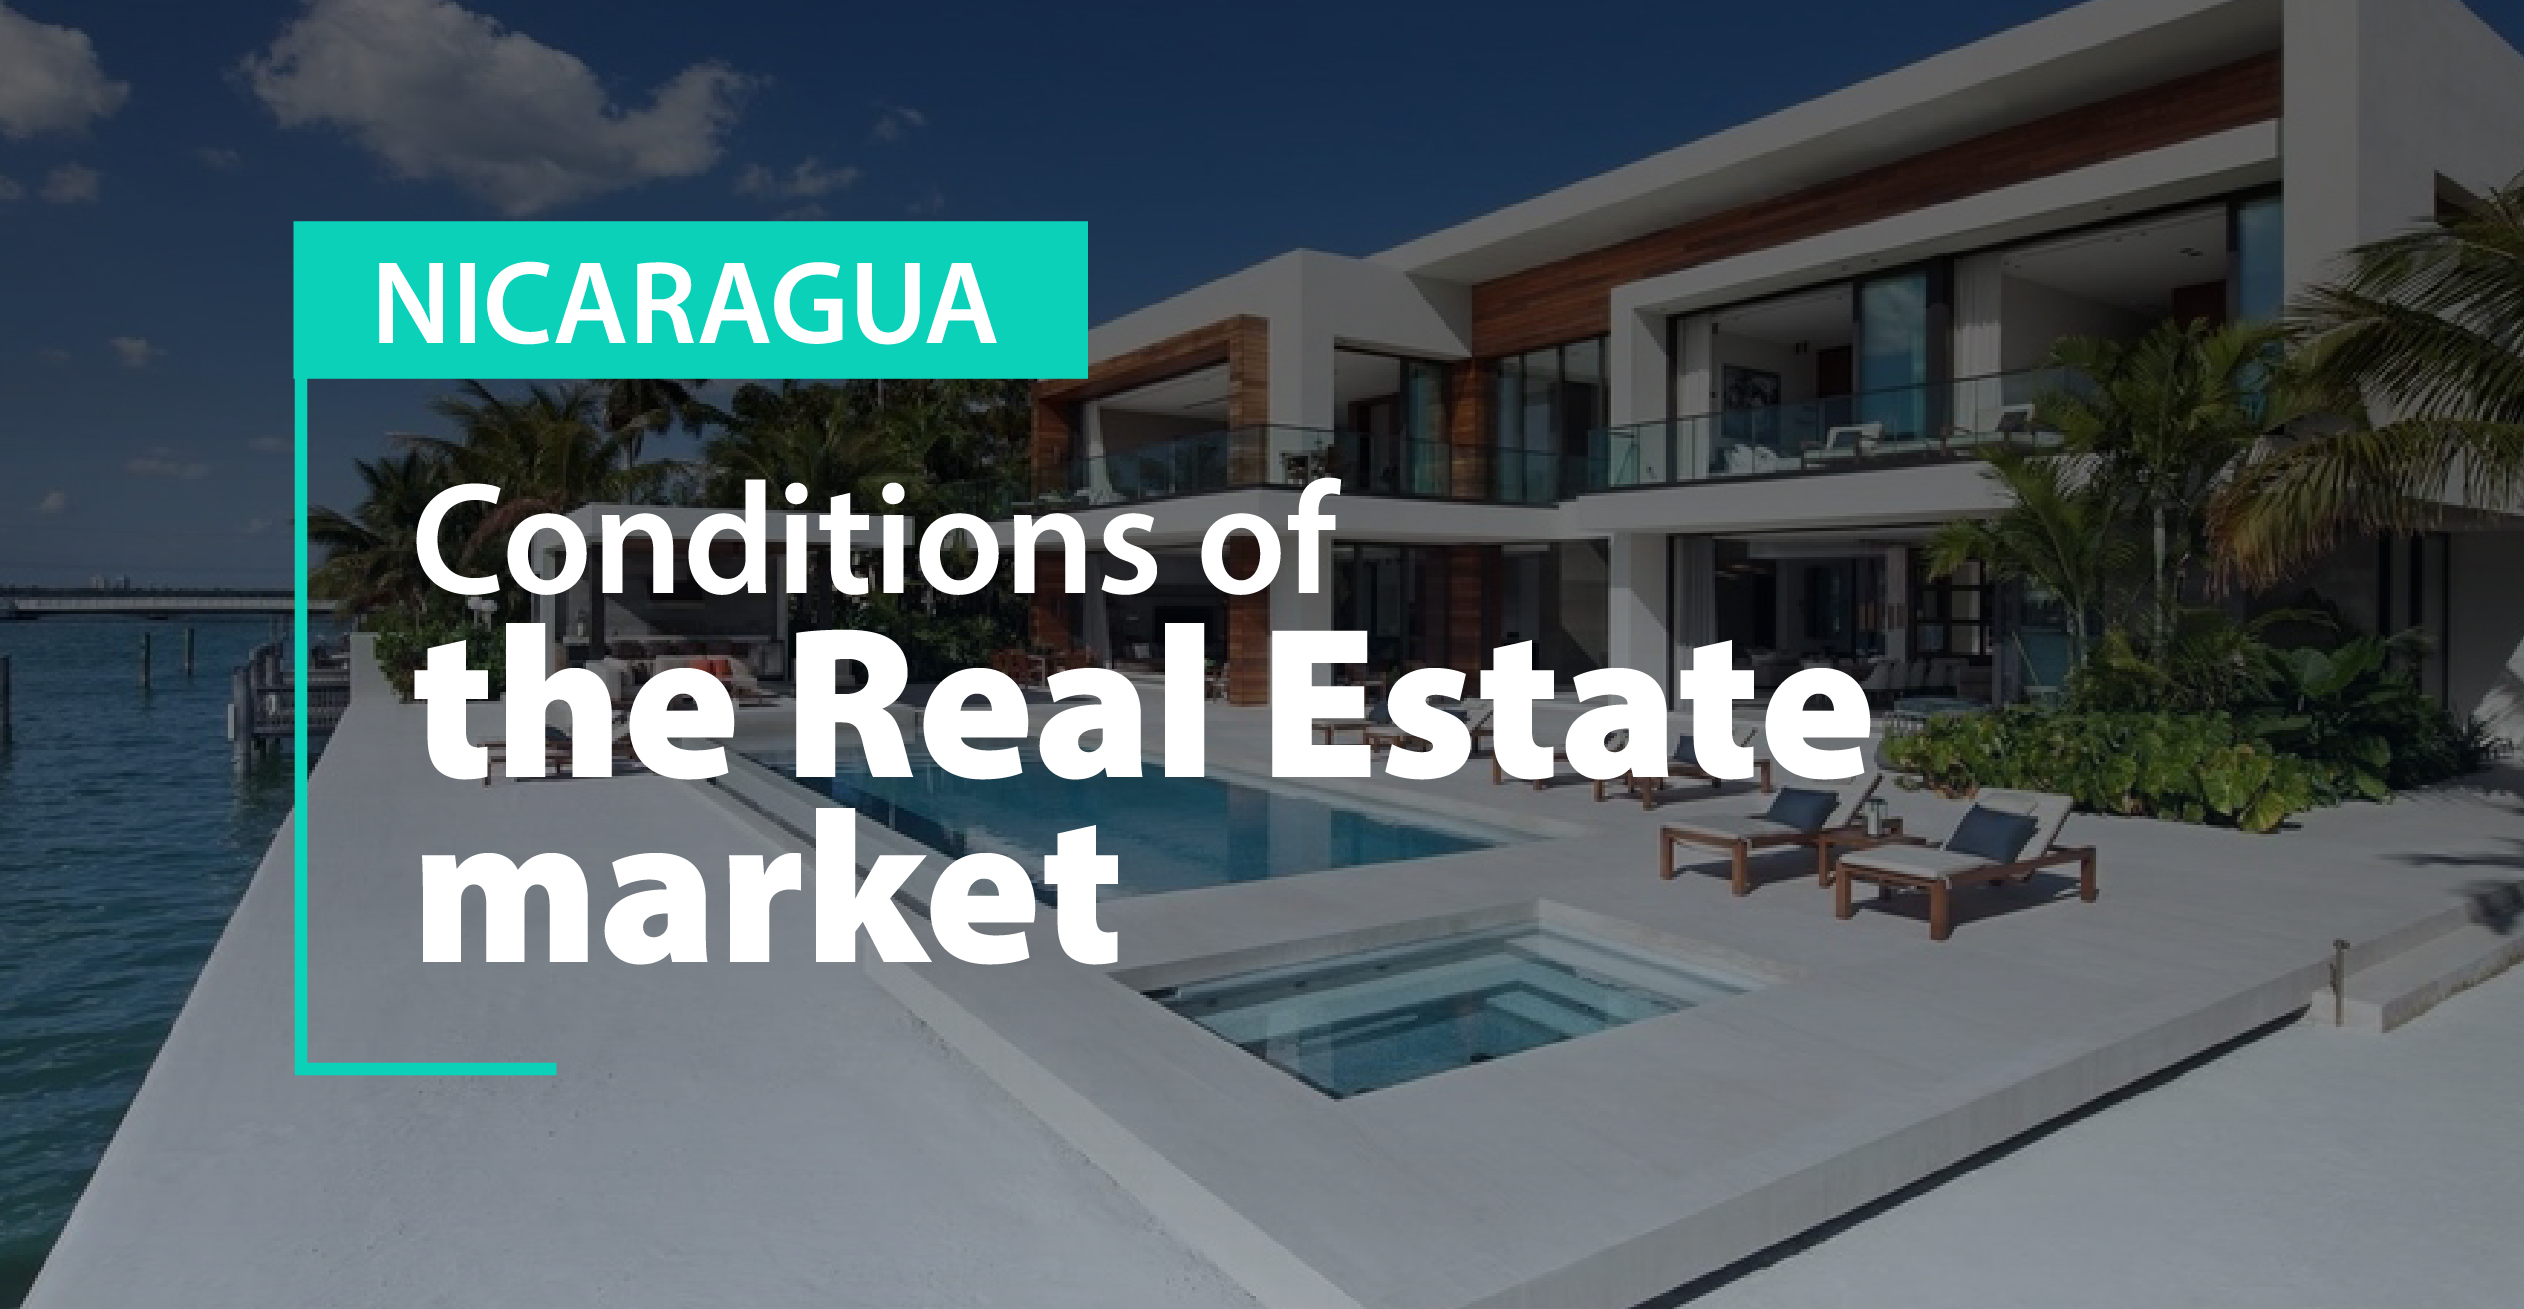 Conditions of the Real Estate market in Nicaragua